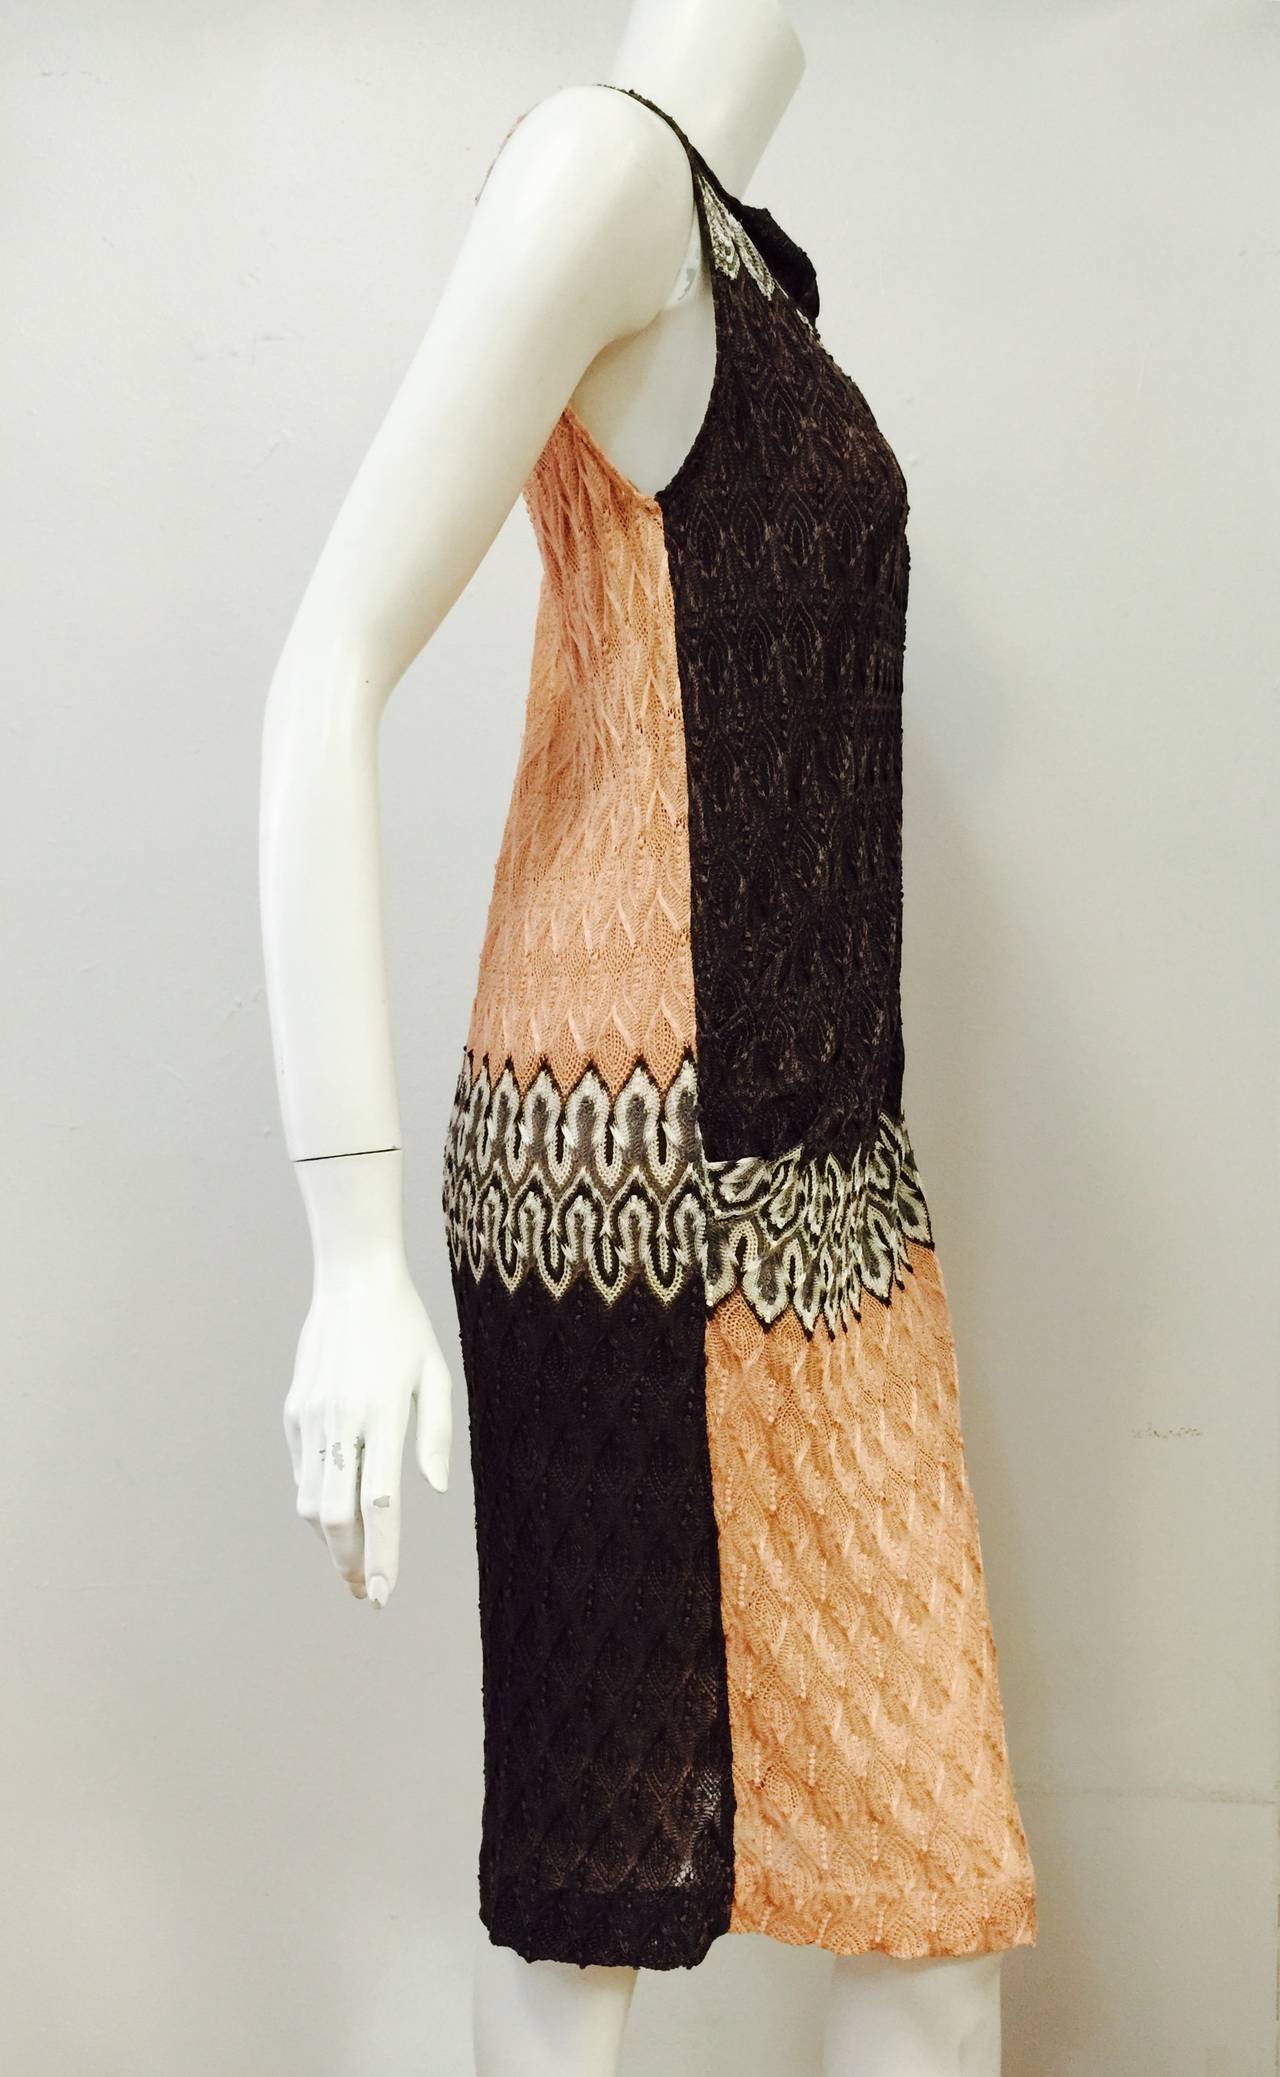 Missoni Multicolor Knit Sleeveless Sheath Dress In Excellent Condition For Sale In Palm Beach, FL